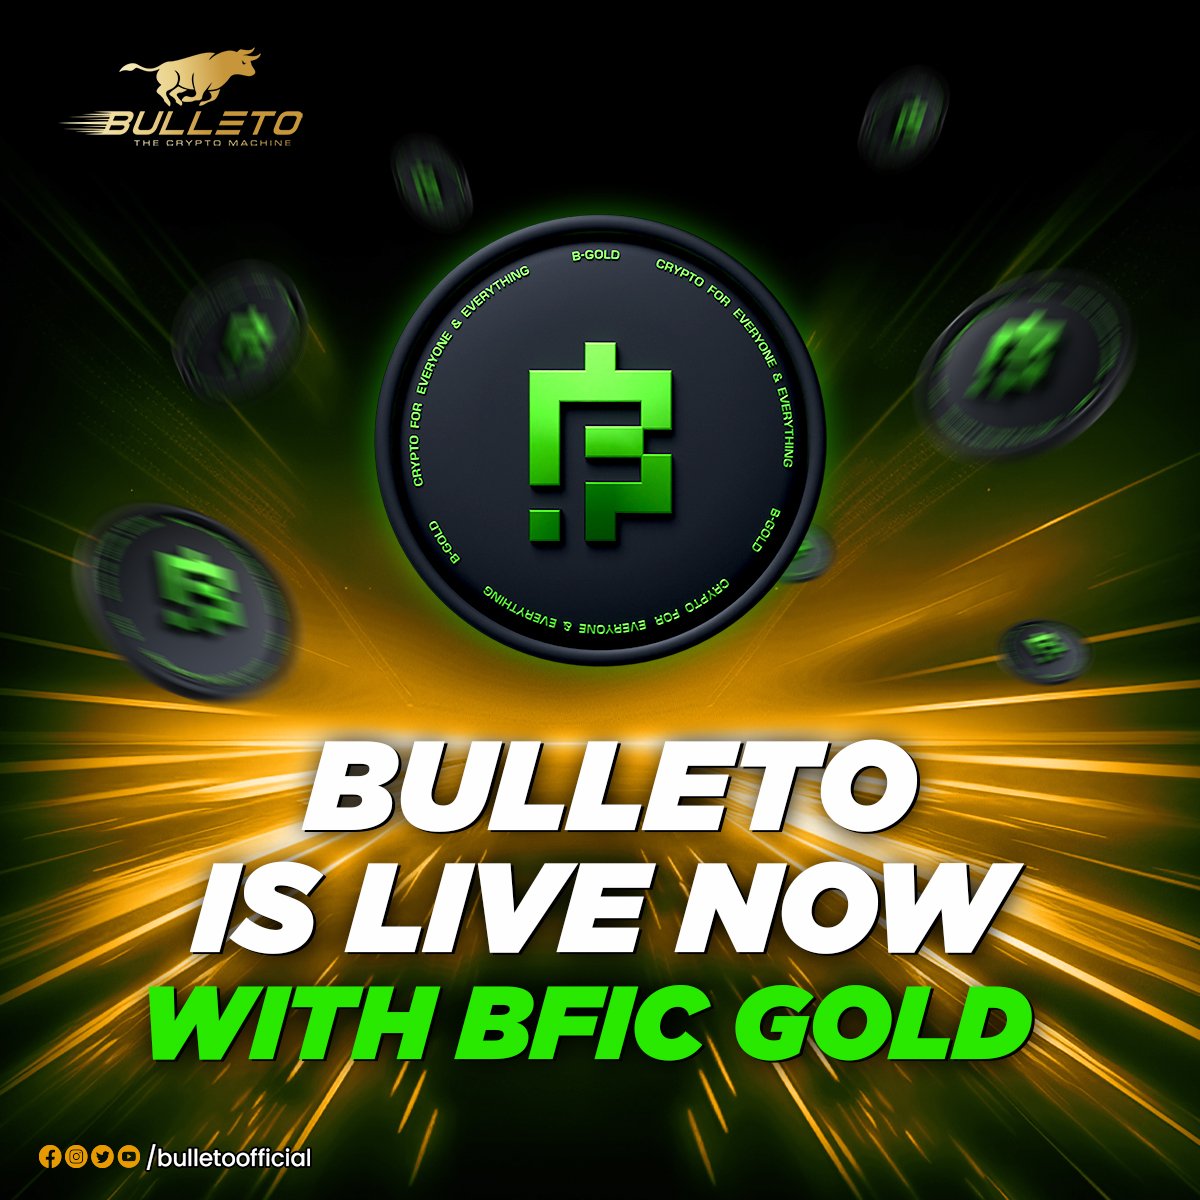 Unveiling the next chapter for the Bulleto Community!🔥

Introducing Bulleto - The Crypto Machine, now soaring high with the power of BFIC Gold!

#Bulleto #BulletoCommunity #BFICGold #BFICGoldincome #BFICCommunity #BFICGoldCommunity #TheCryptoMachine #NowLIVE #Changeyourlife #ear